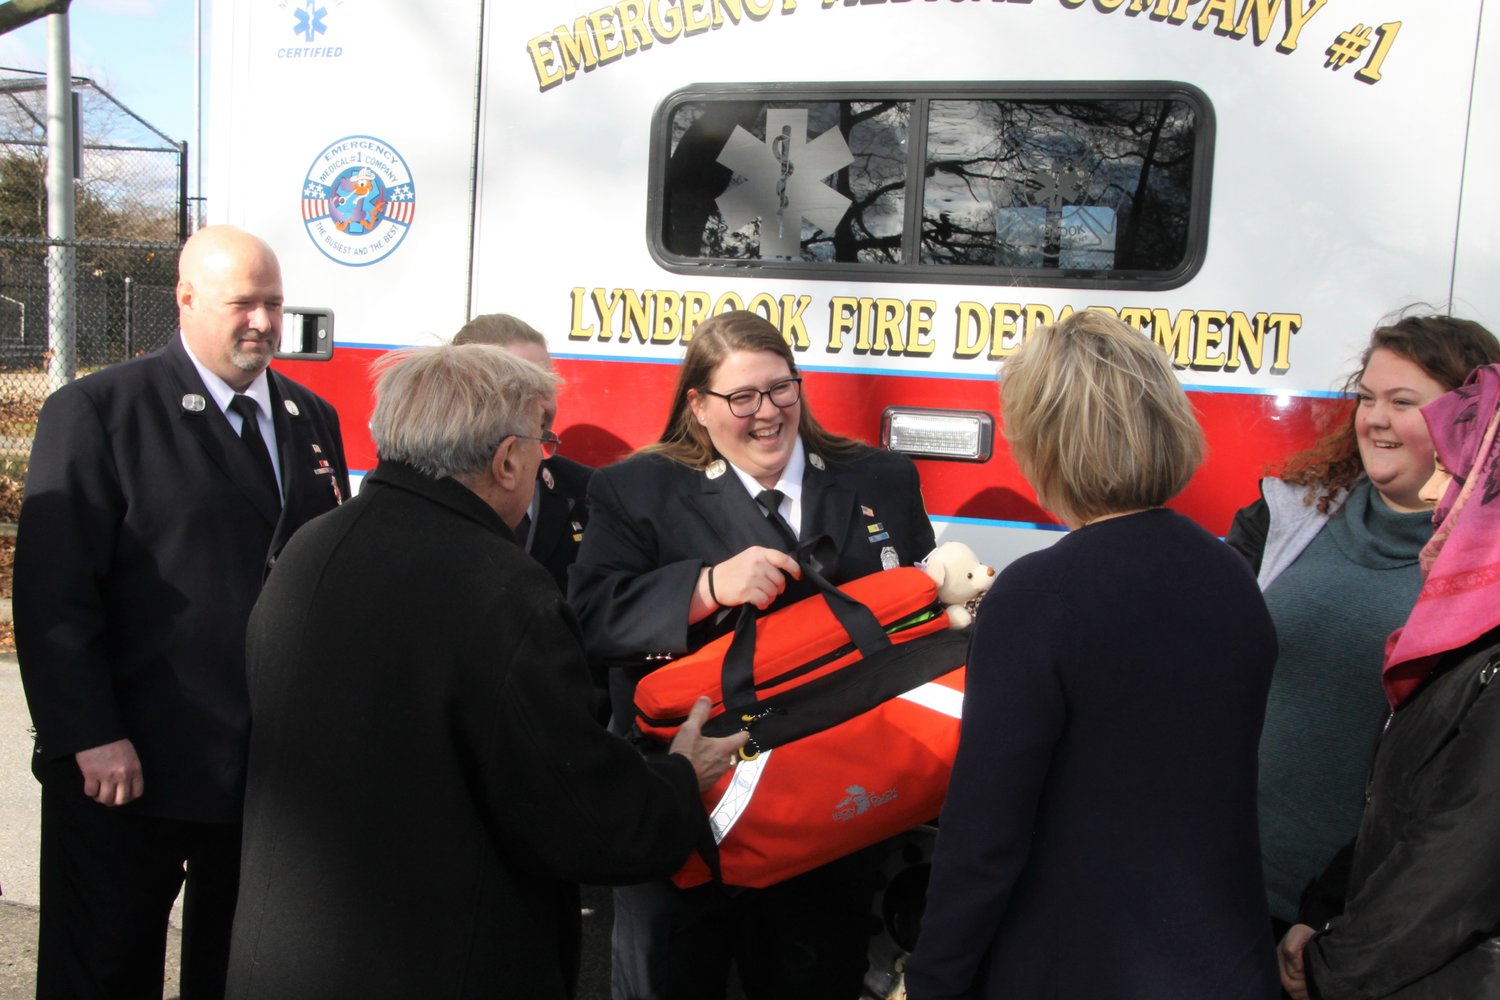 The Lynbrook Fire Department and the village’s Kiwanis Club got together on Jan. 5 in celebration of the dedication.